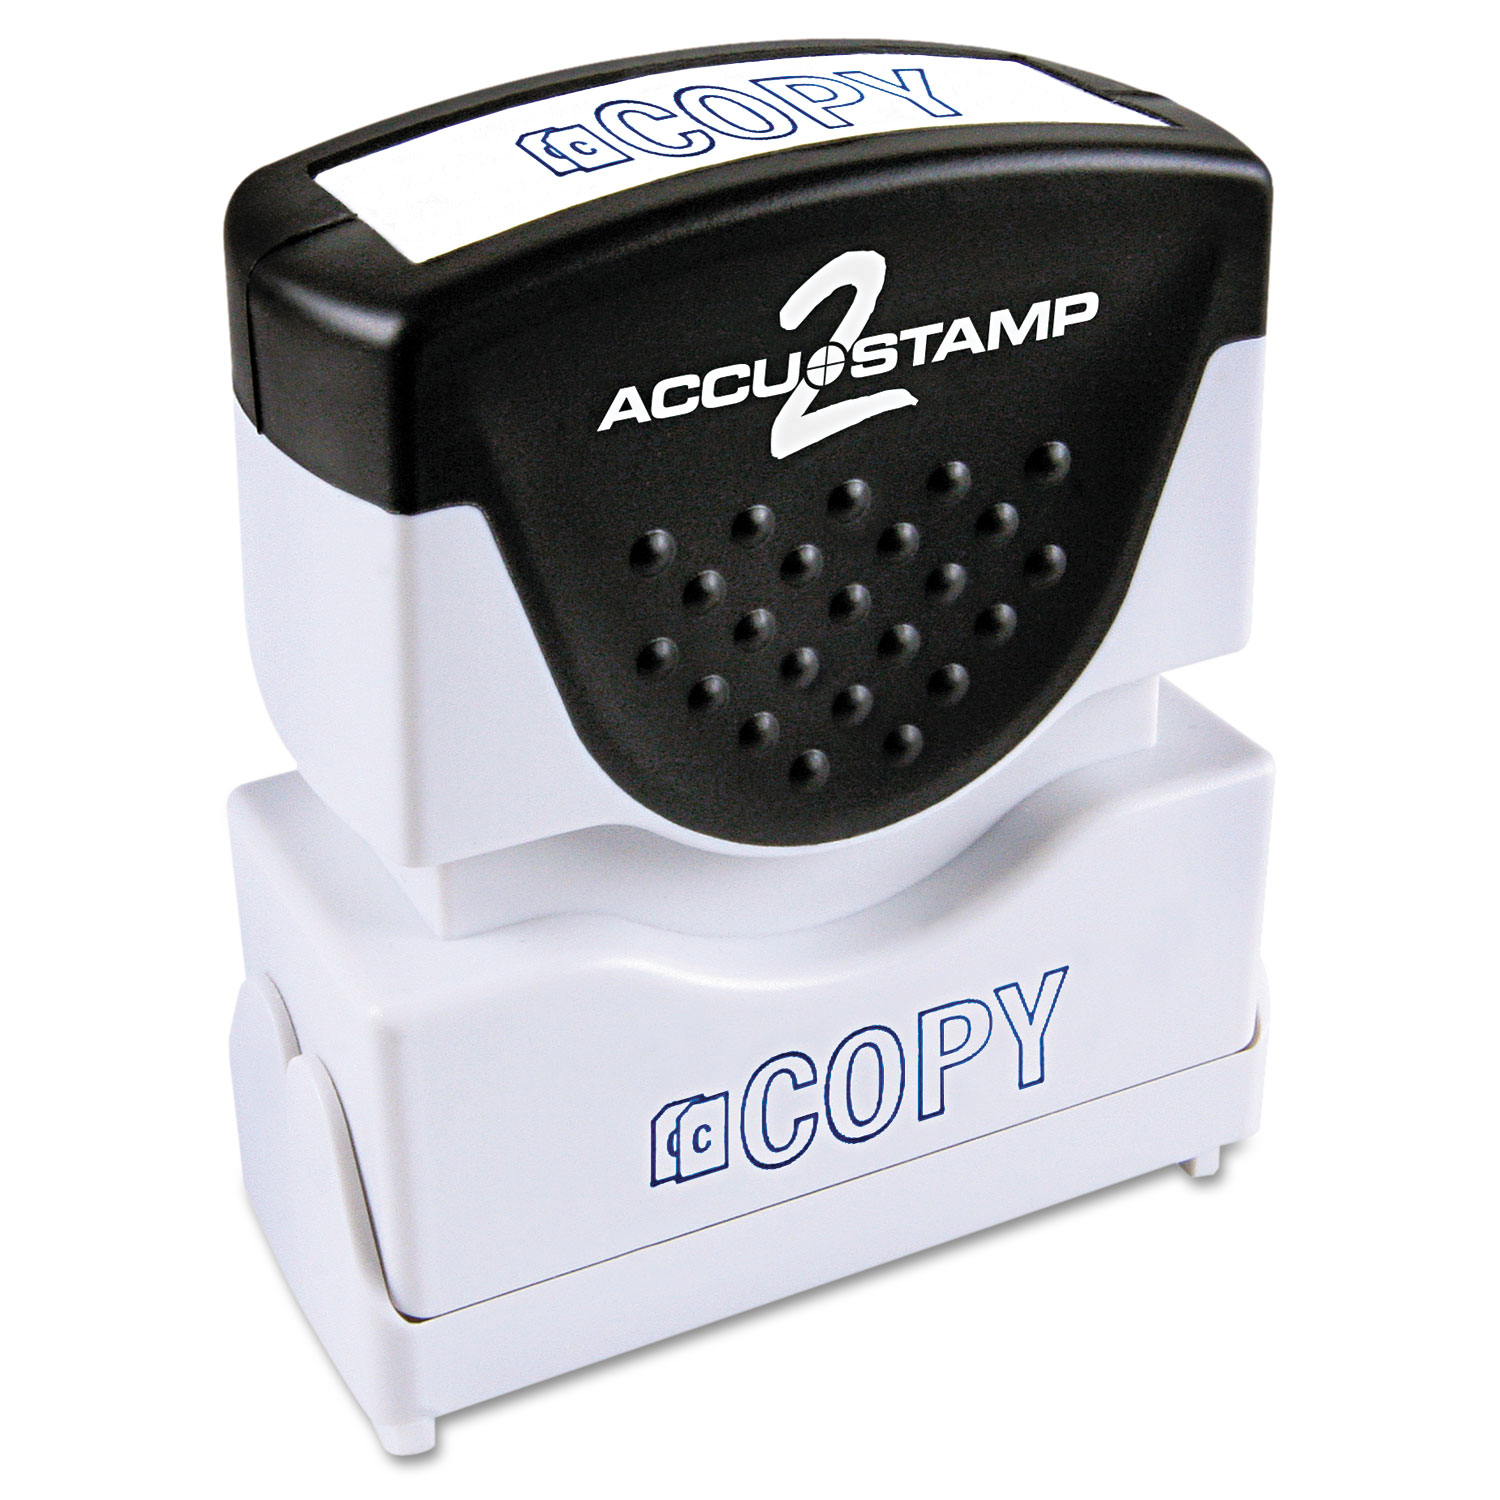  ACCUSTAMP2 035581 Pre-Inked Shutter Stamp, Blue, COPY, 1 5/8 x 1/2 (COS035581) 